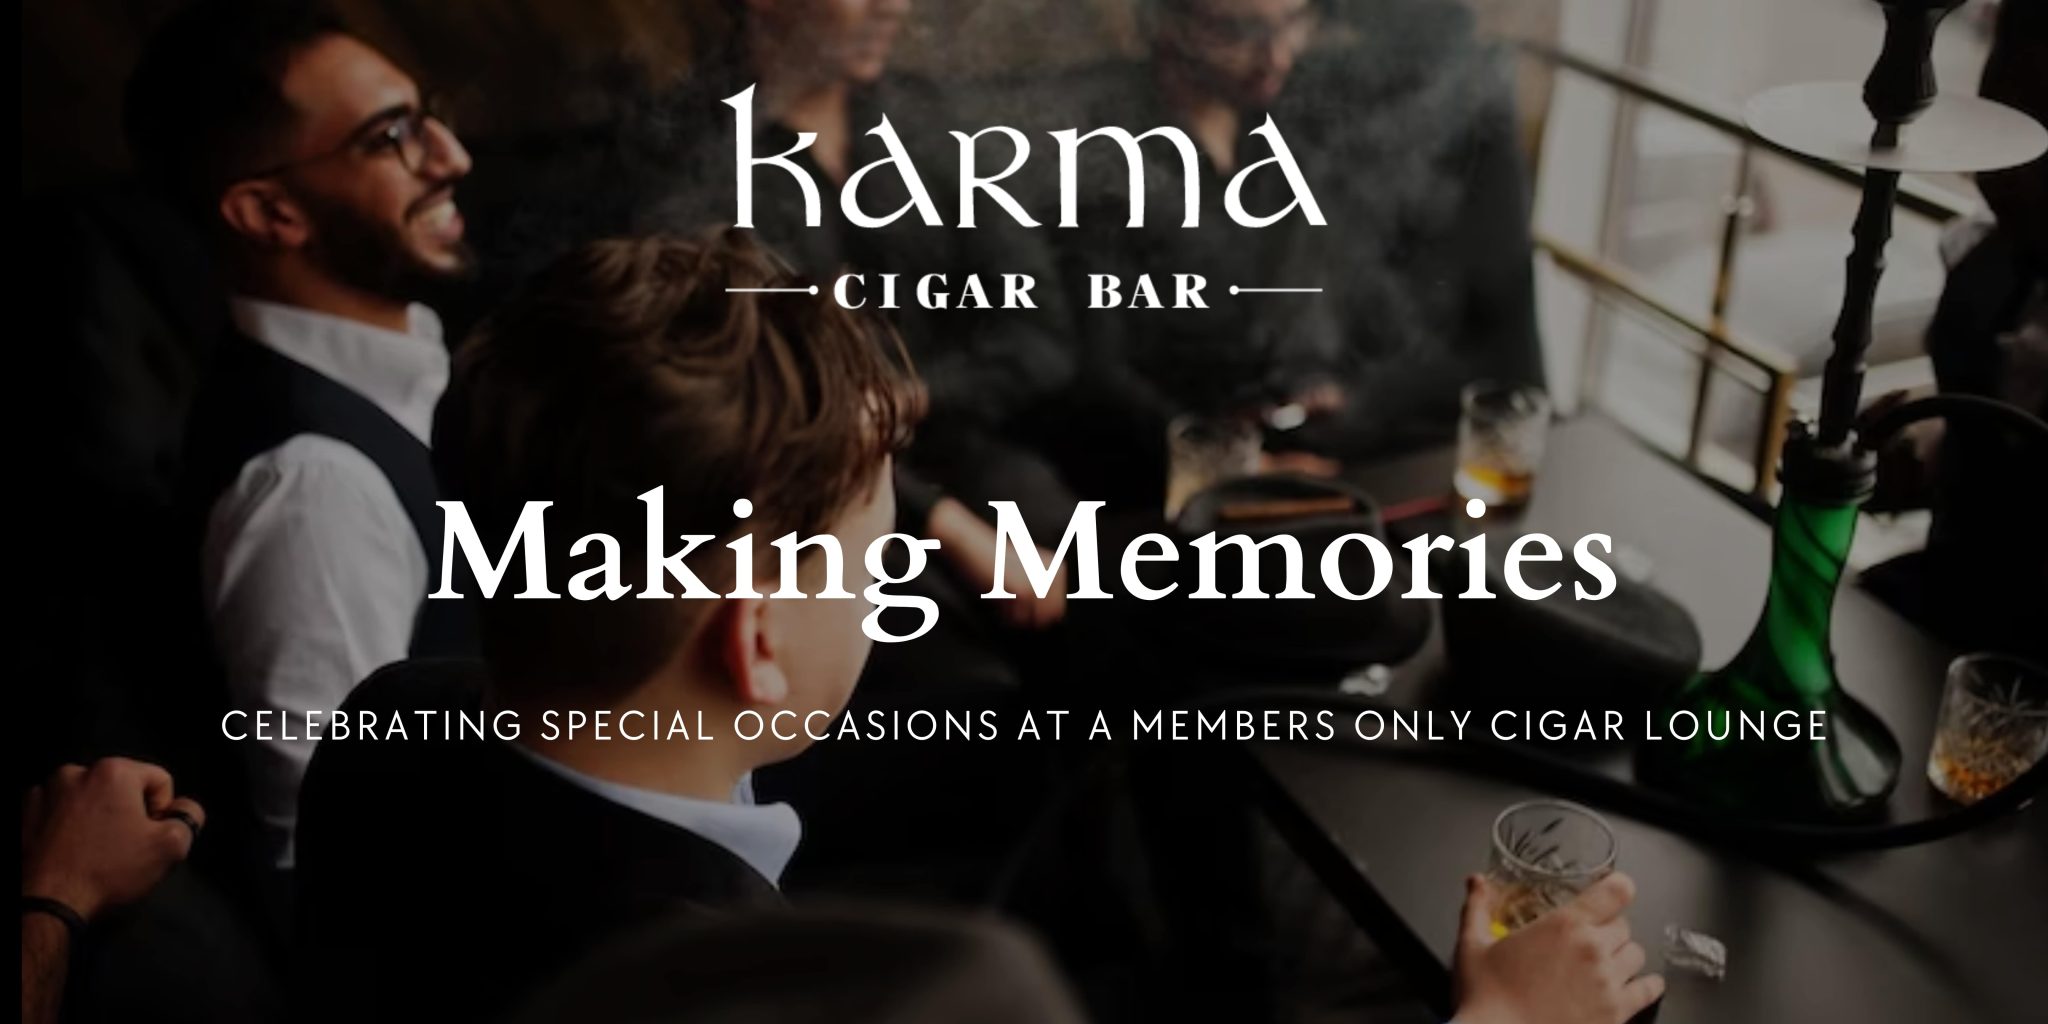 Celebrating Special Occasions at a Members Only Cigar Lounge